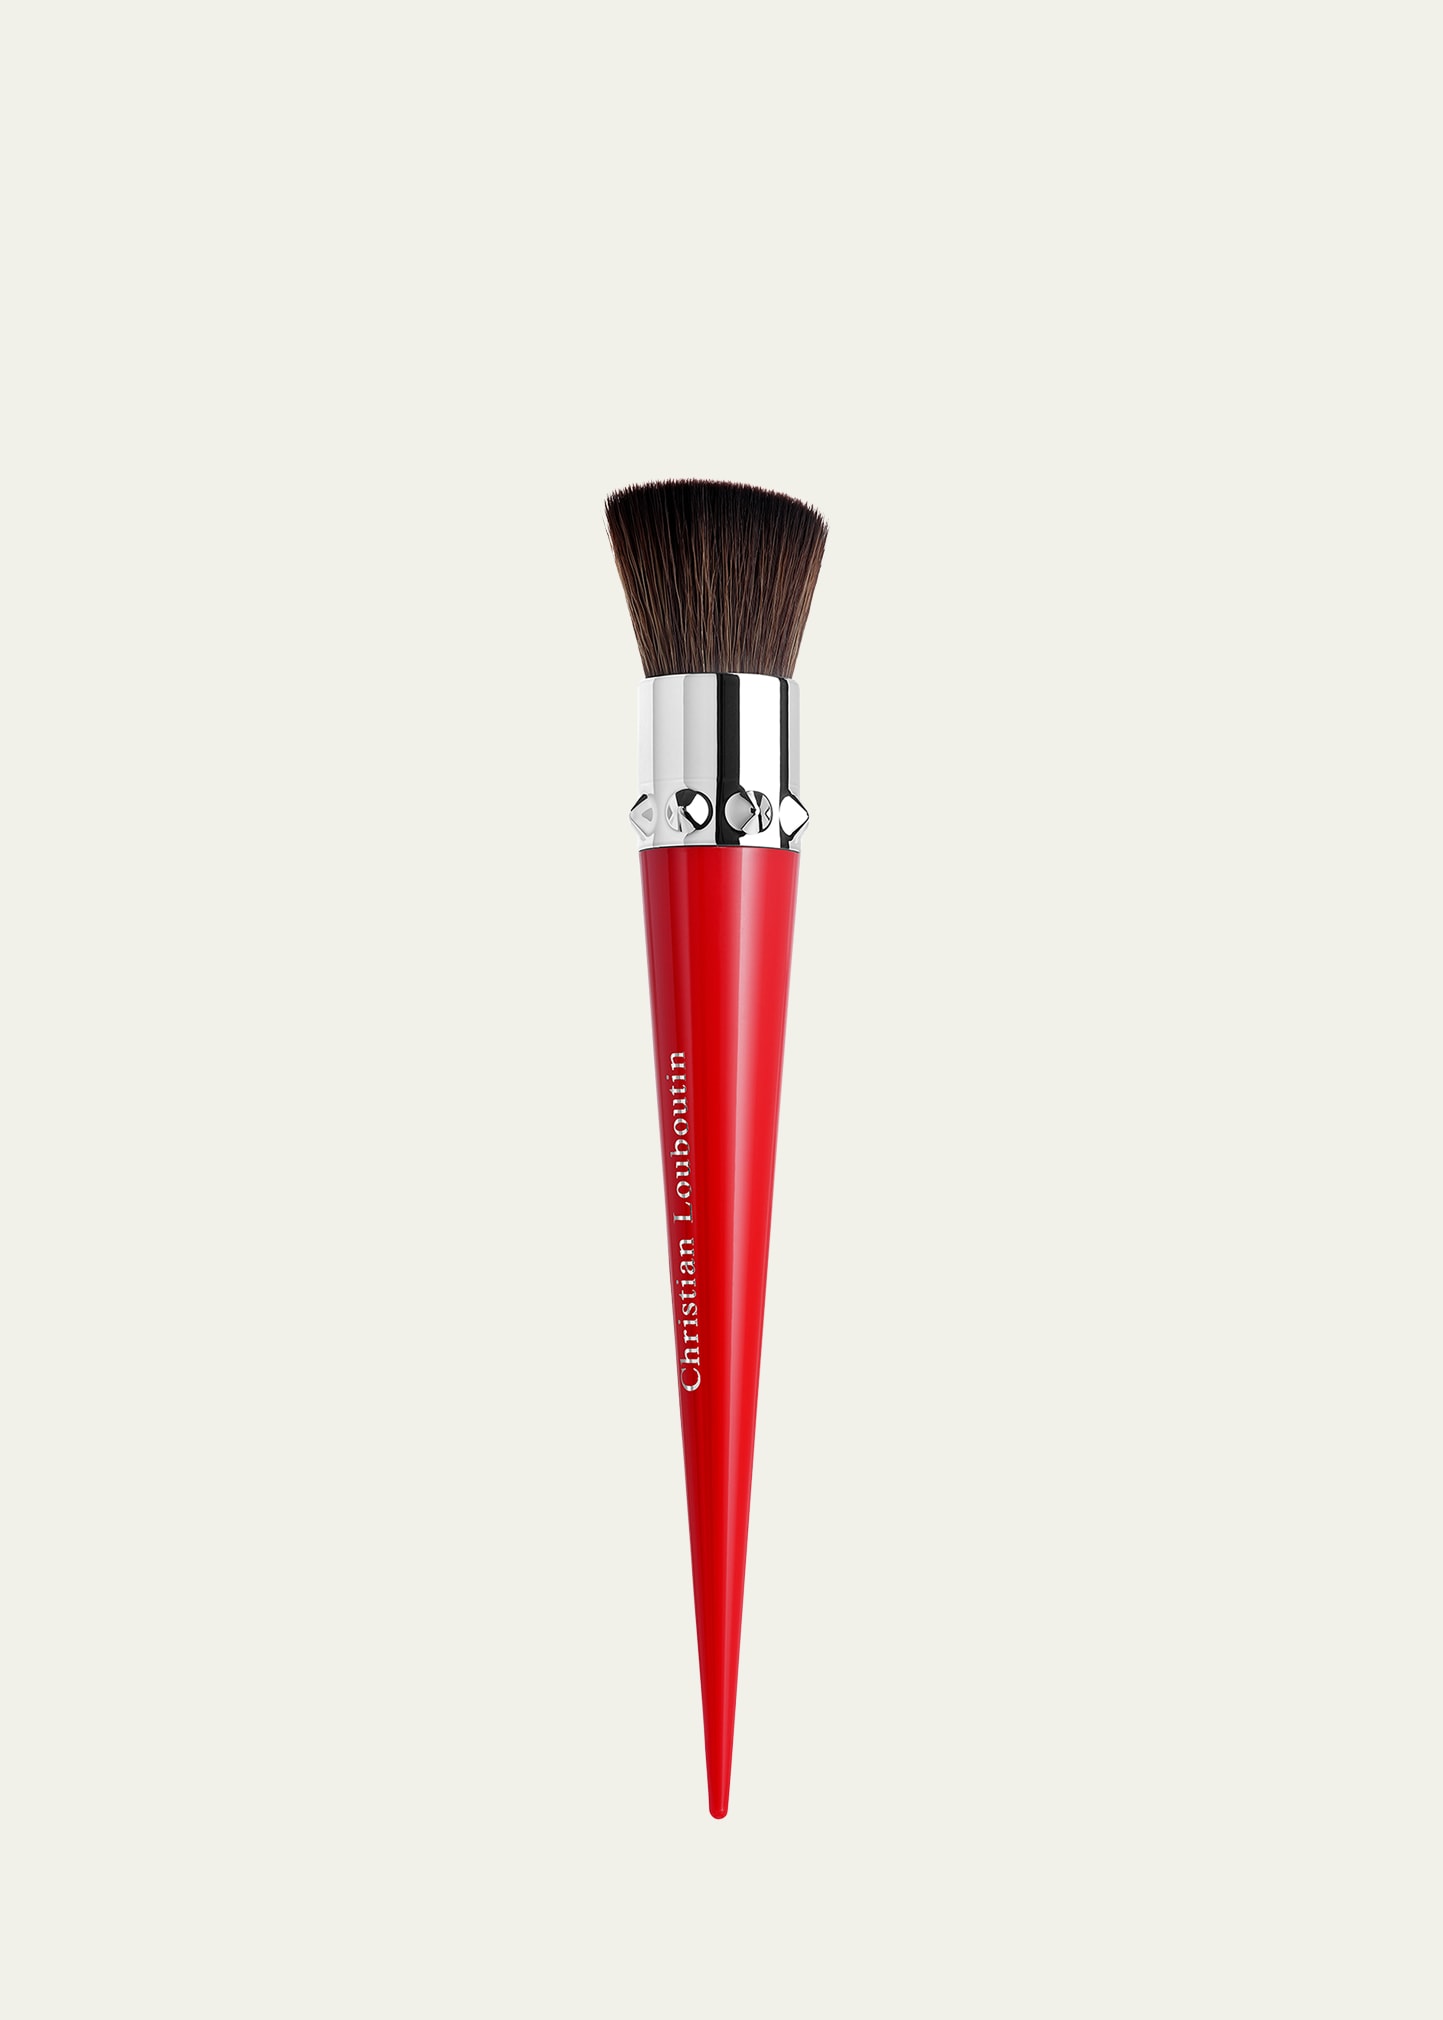 Christian Louboutin All-over Me Foundation Brush In White